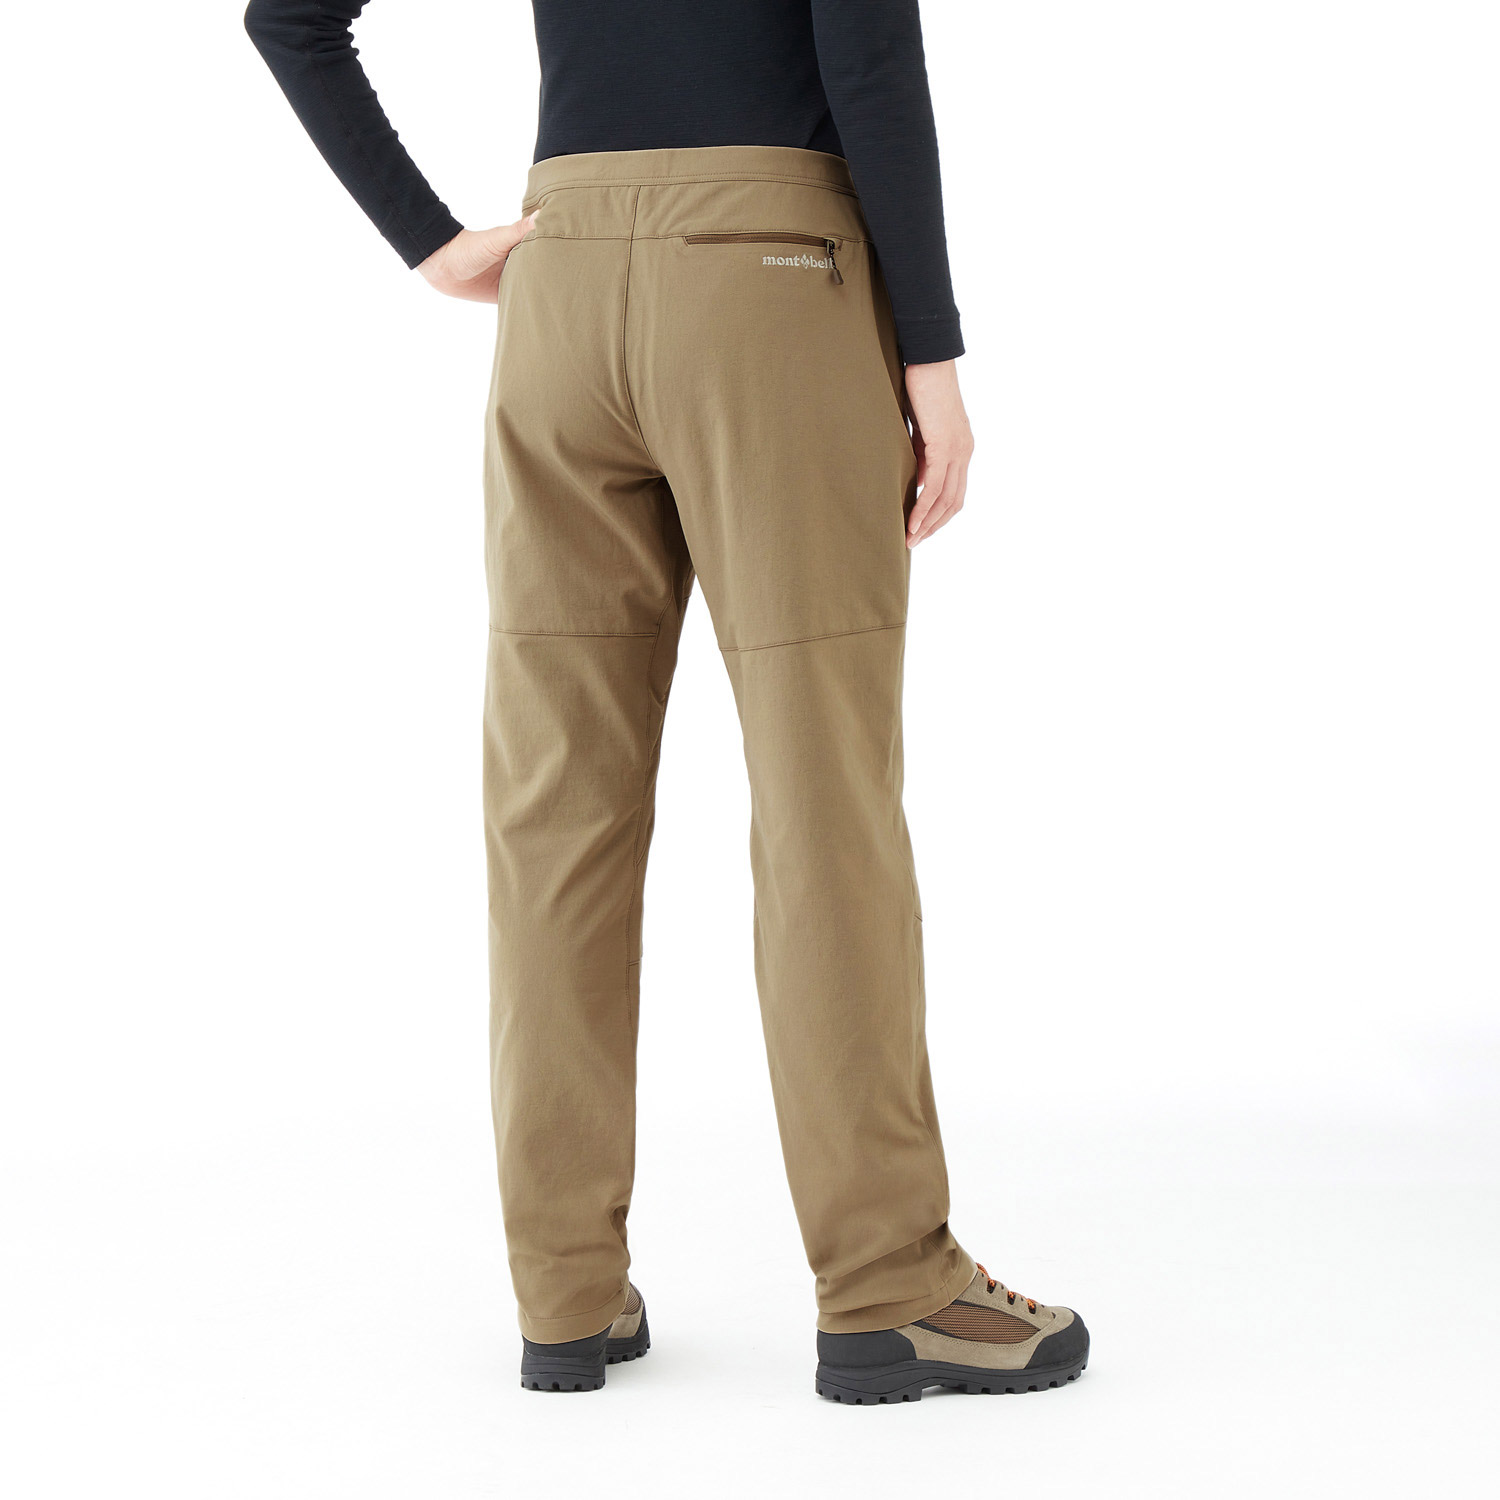 Super Merino Wool Middle Weight Tights Women's